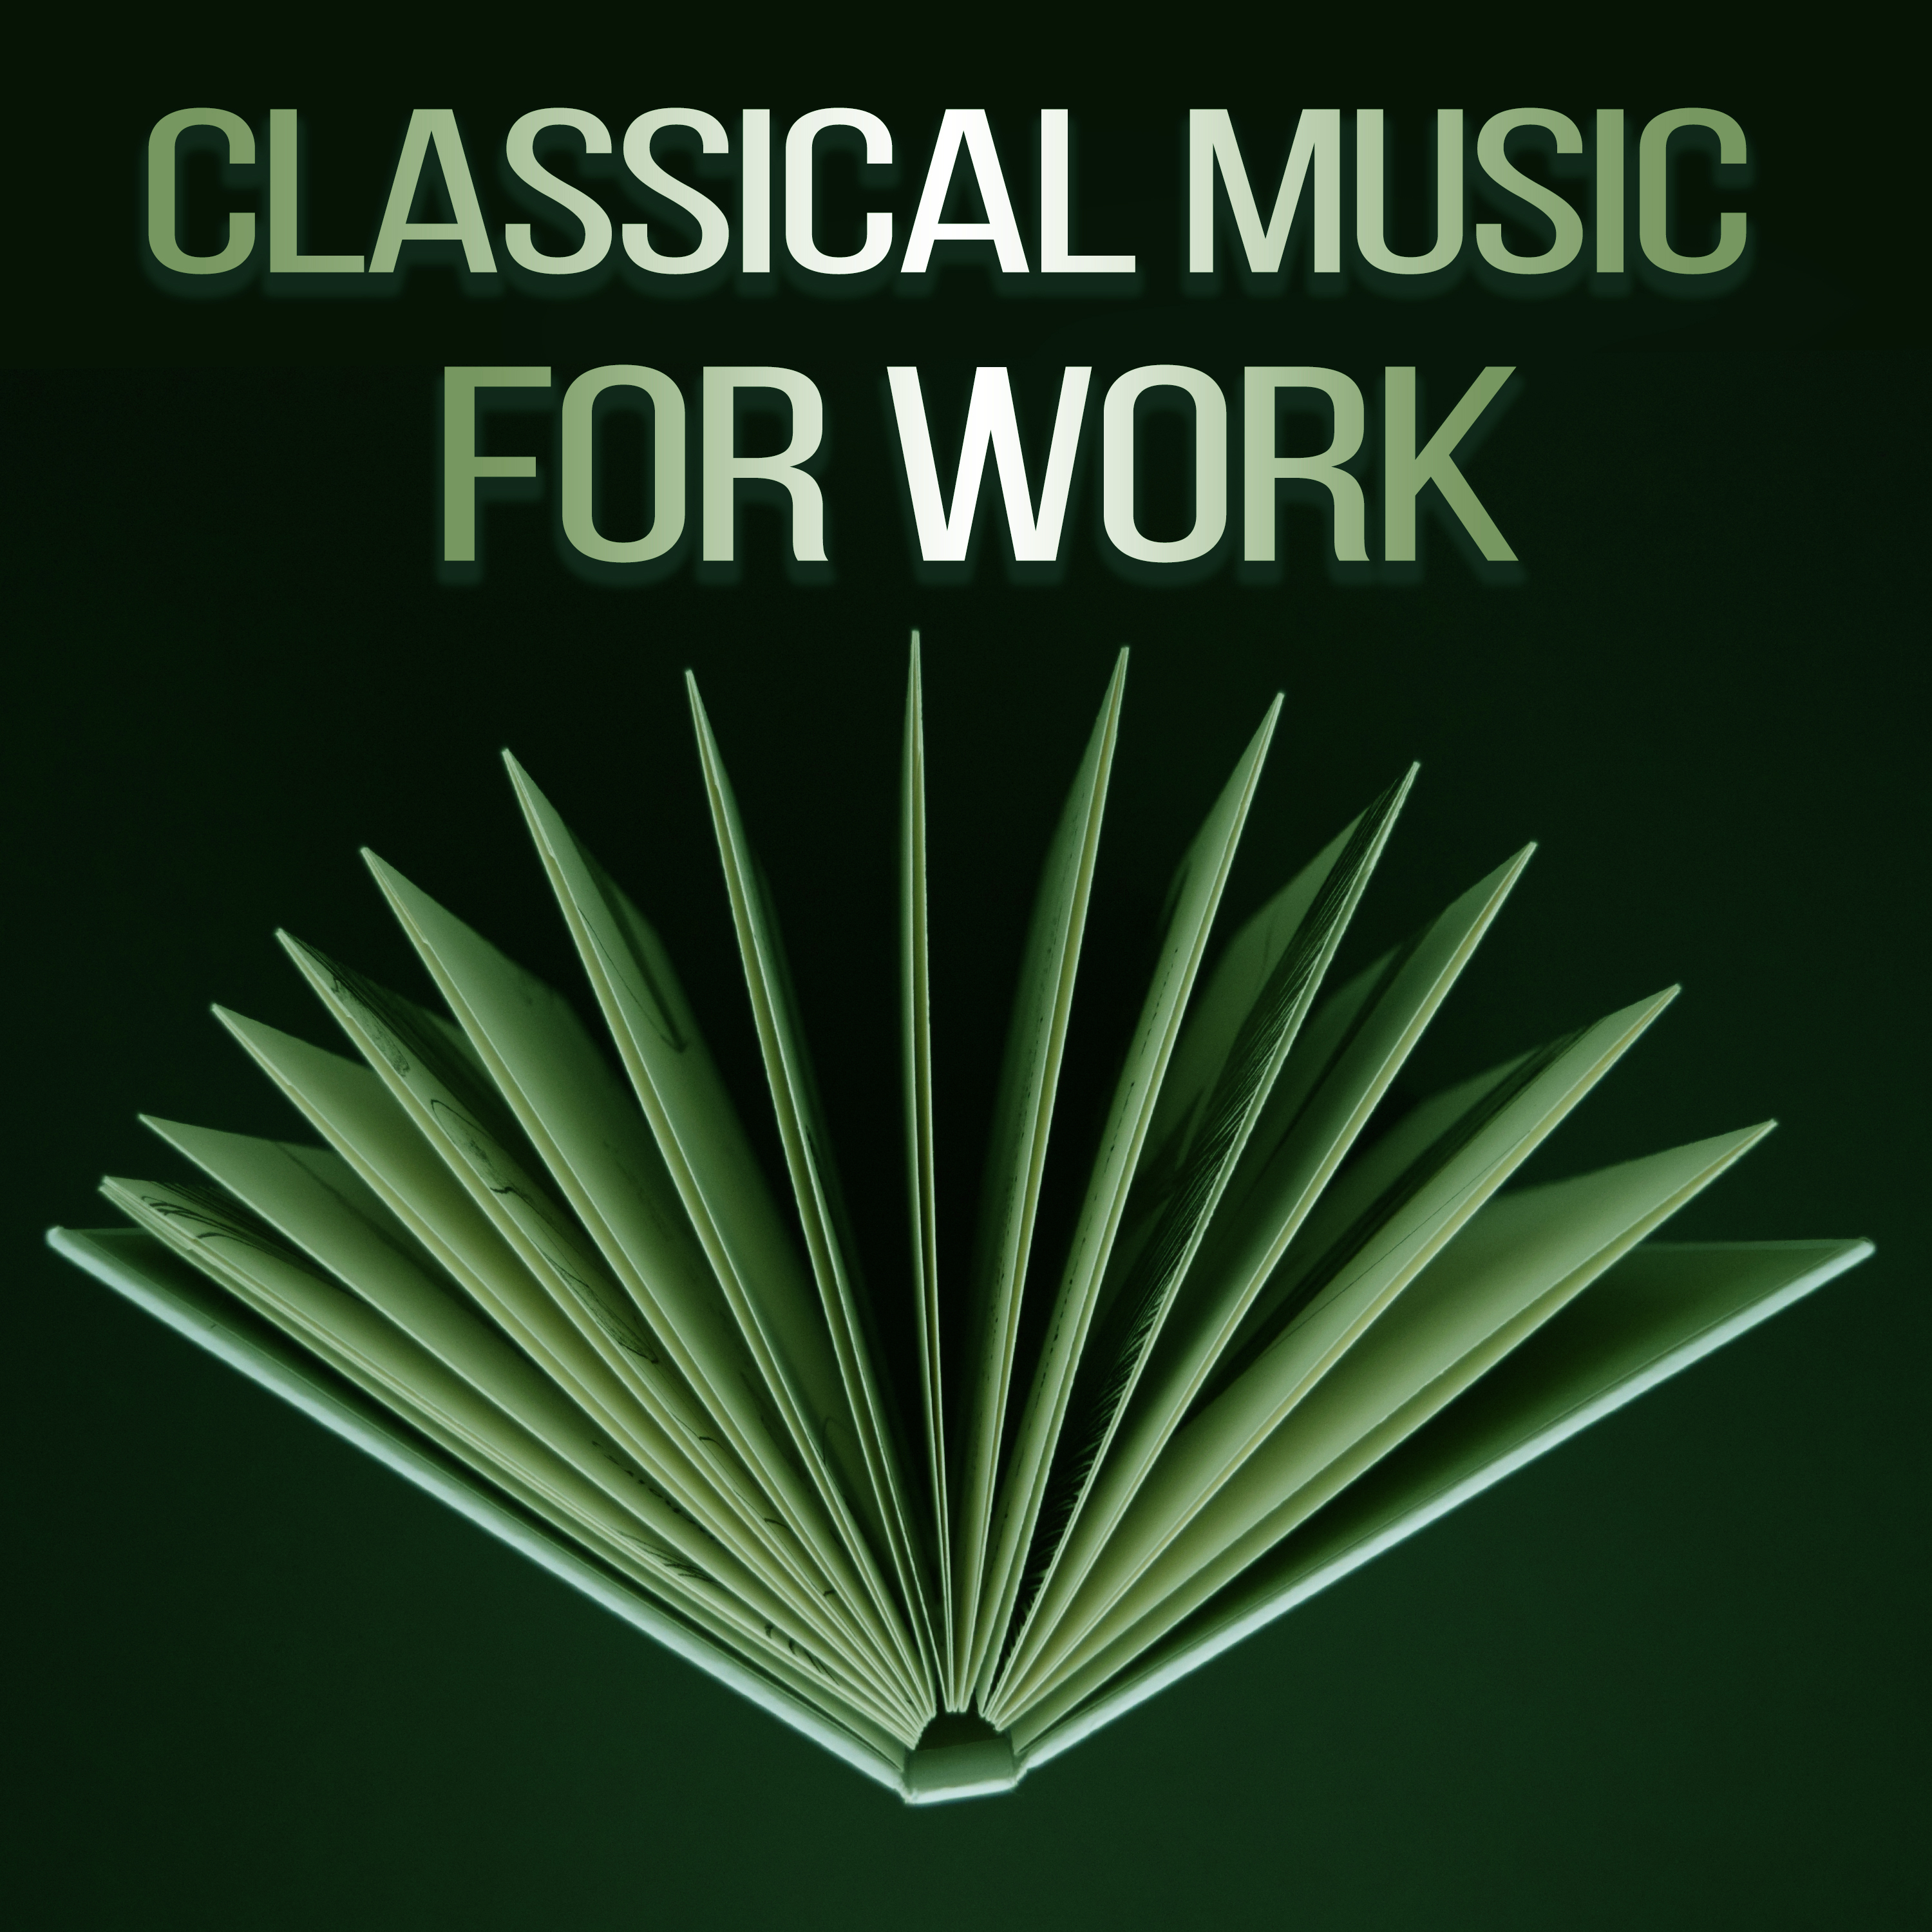 Classical Music for Work  Songs for Study, Easy Learning, Effective Work, Music Helps in Concentration